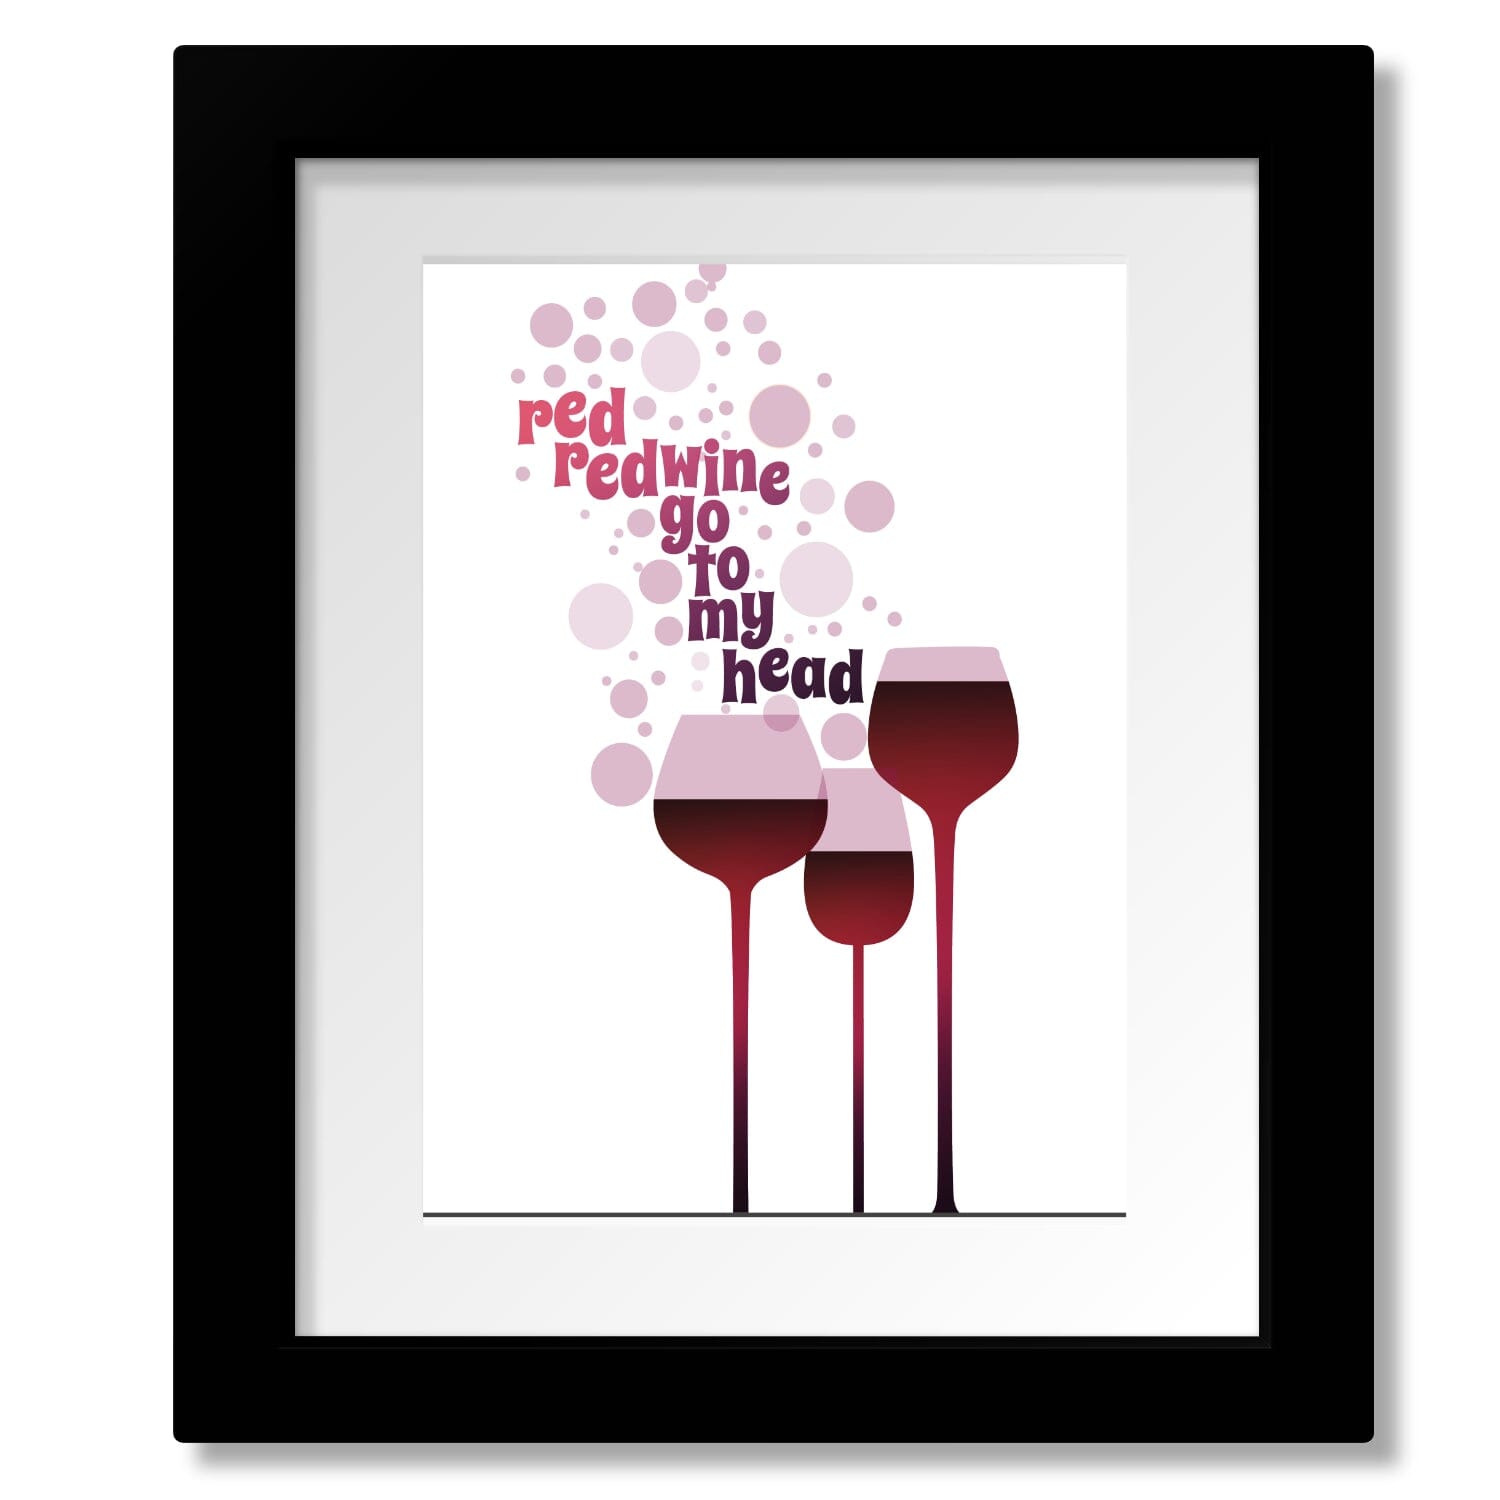 Red Red Wine by Neil Diamond - Music Quote Poster Art Song Lyrics Art Song Lyrics Art 8x10 Matted and Framed Print 